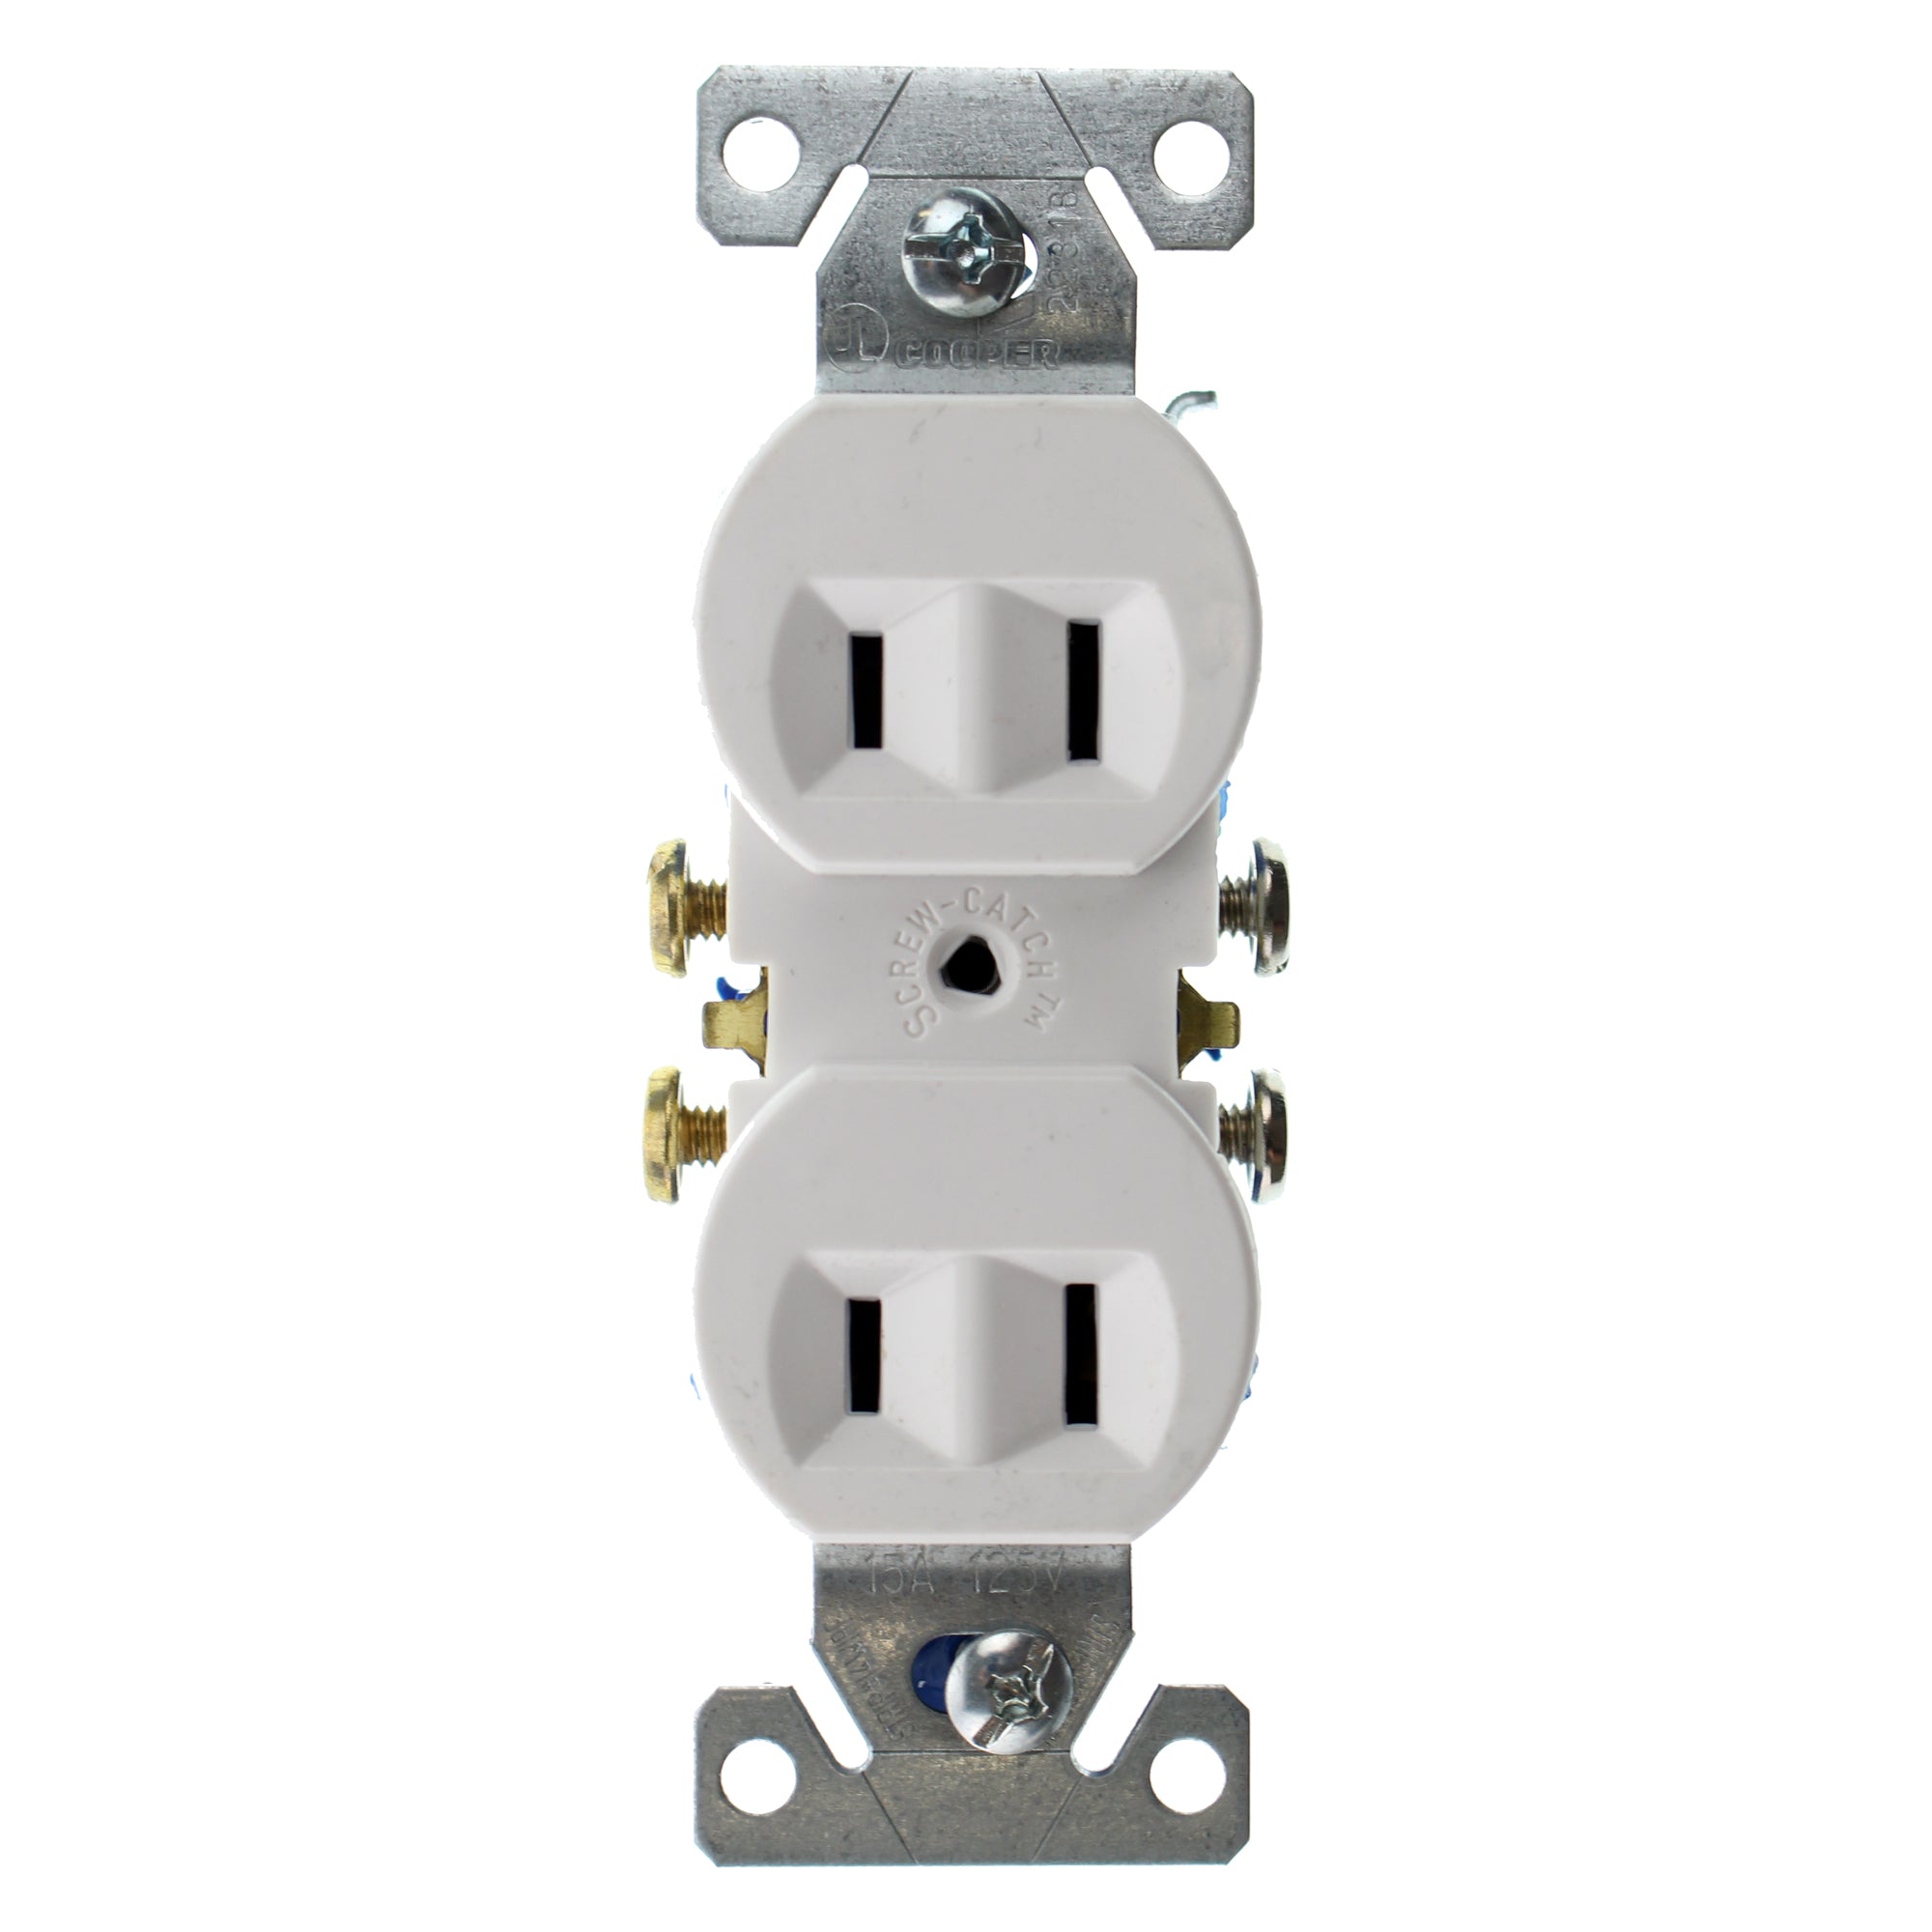 EATON, EATON COOPER 736W-SP-L RECETPACLE OUTLET, NON-GROUNDING, 2-WIRE, 15A 120V, WHITE